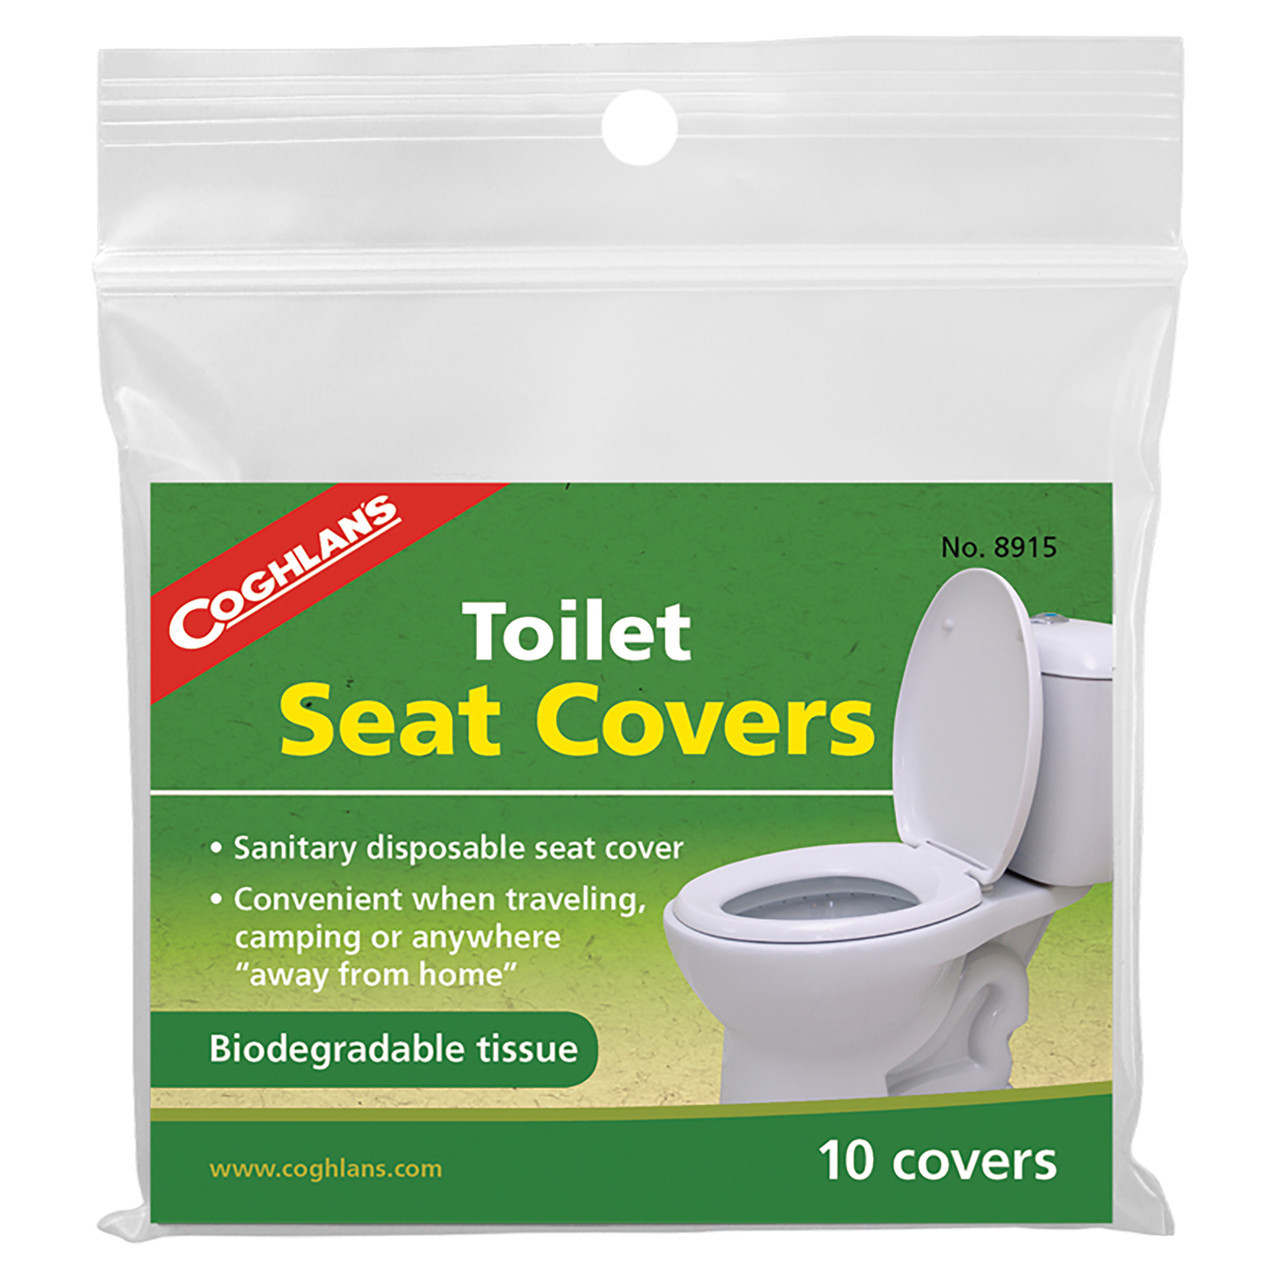 The Necessity Of Disposable Toilet Seat Covers That You Must Know